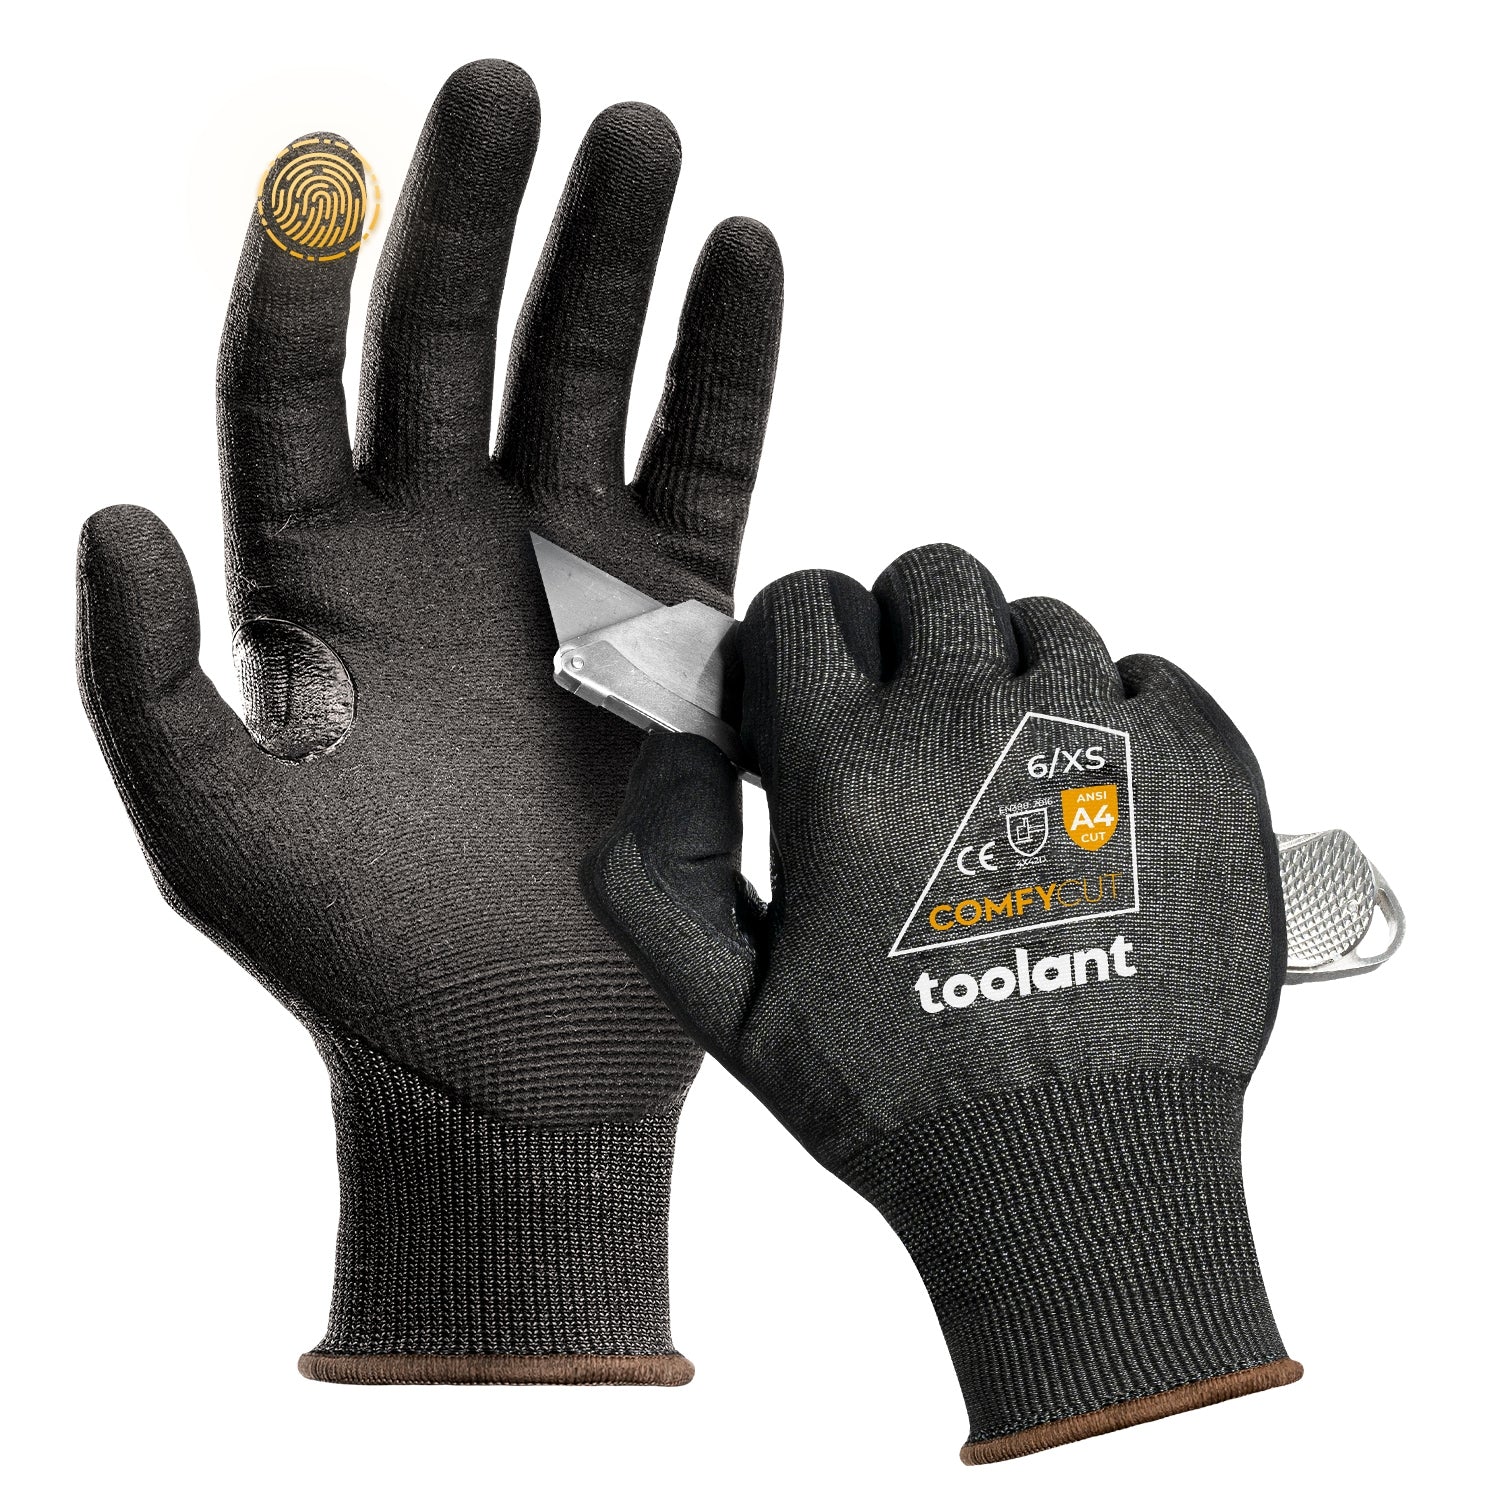 1 Pair Utility Work Gloves Women, Flexible Breathable Yard Work Gloves, Thin  Mechanic Working Gloves Touch Screen